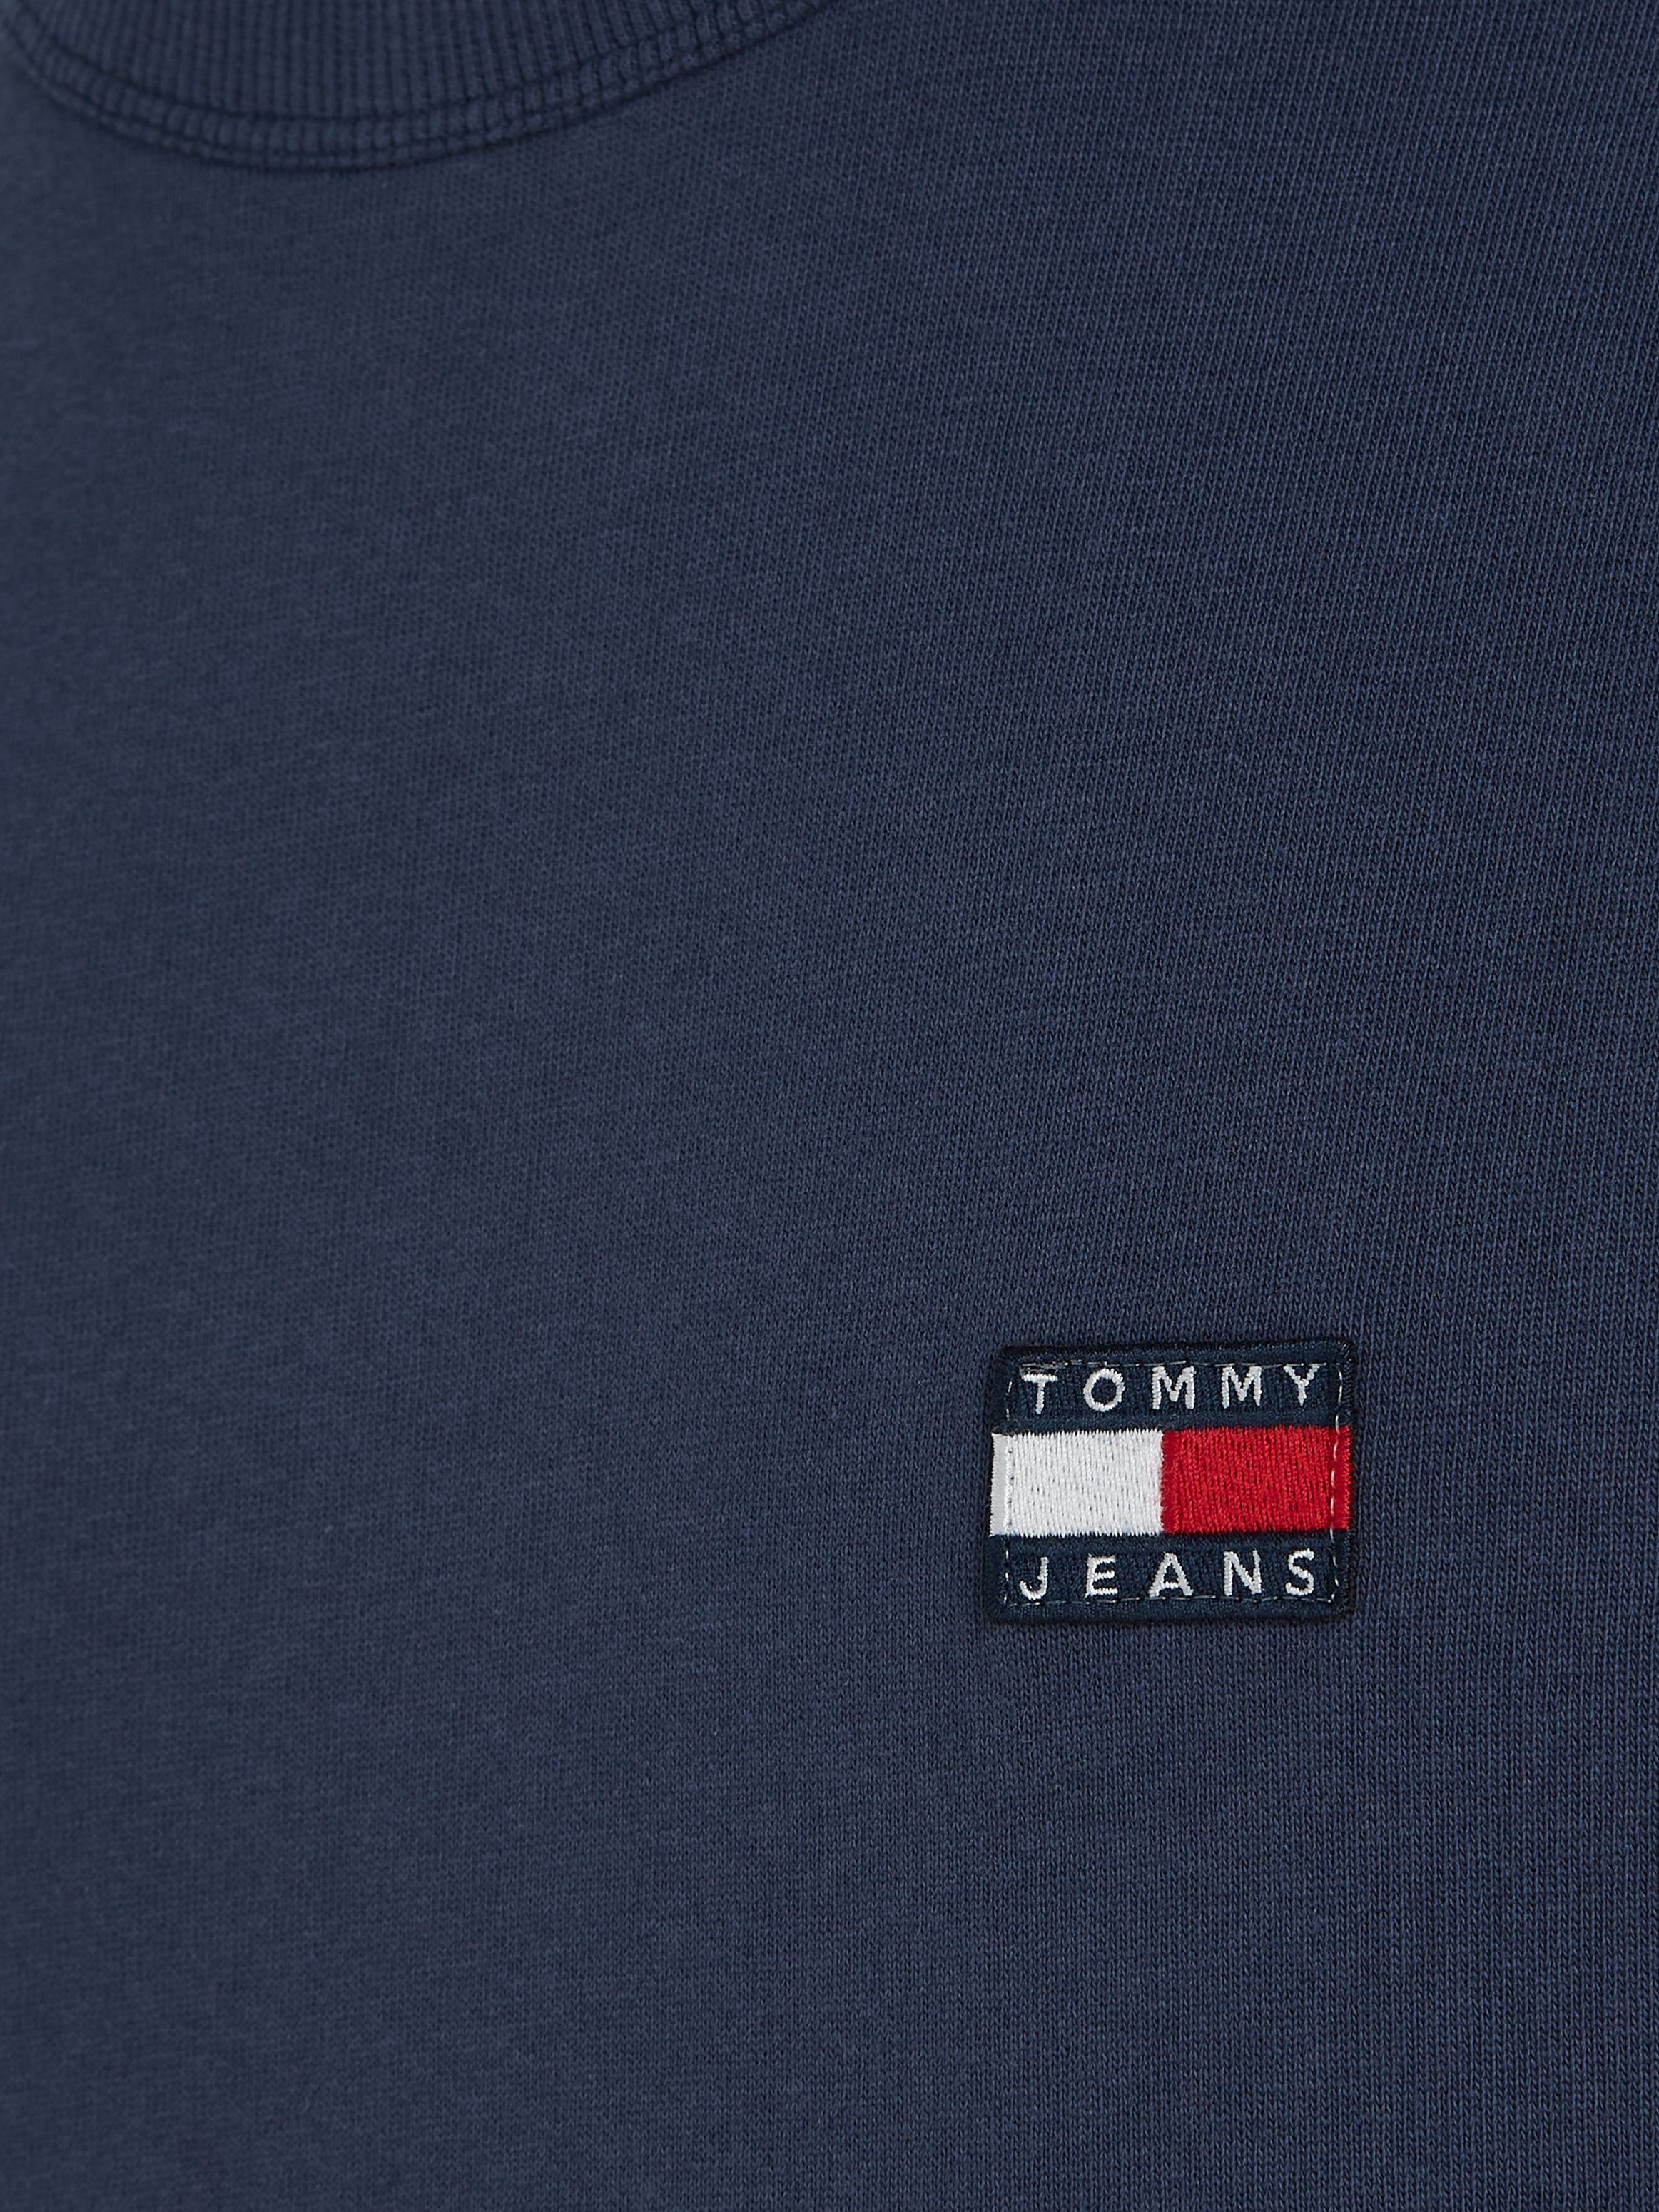 BADGE Tommy XS TEE Twilight T-Shirt TOMMY Navy CLSC TJM Jeans